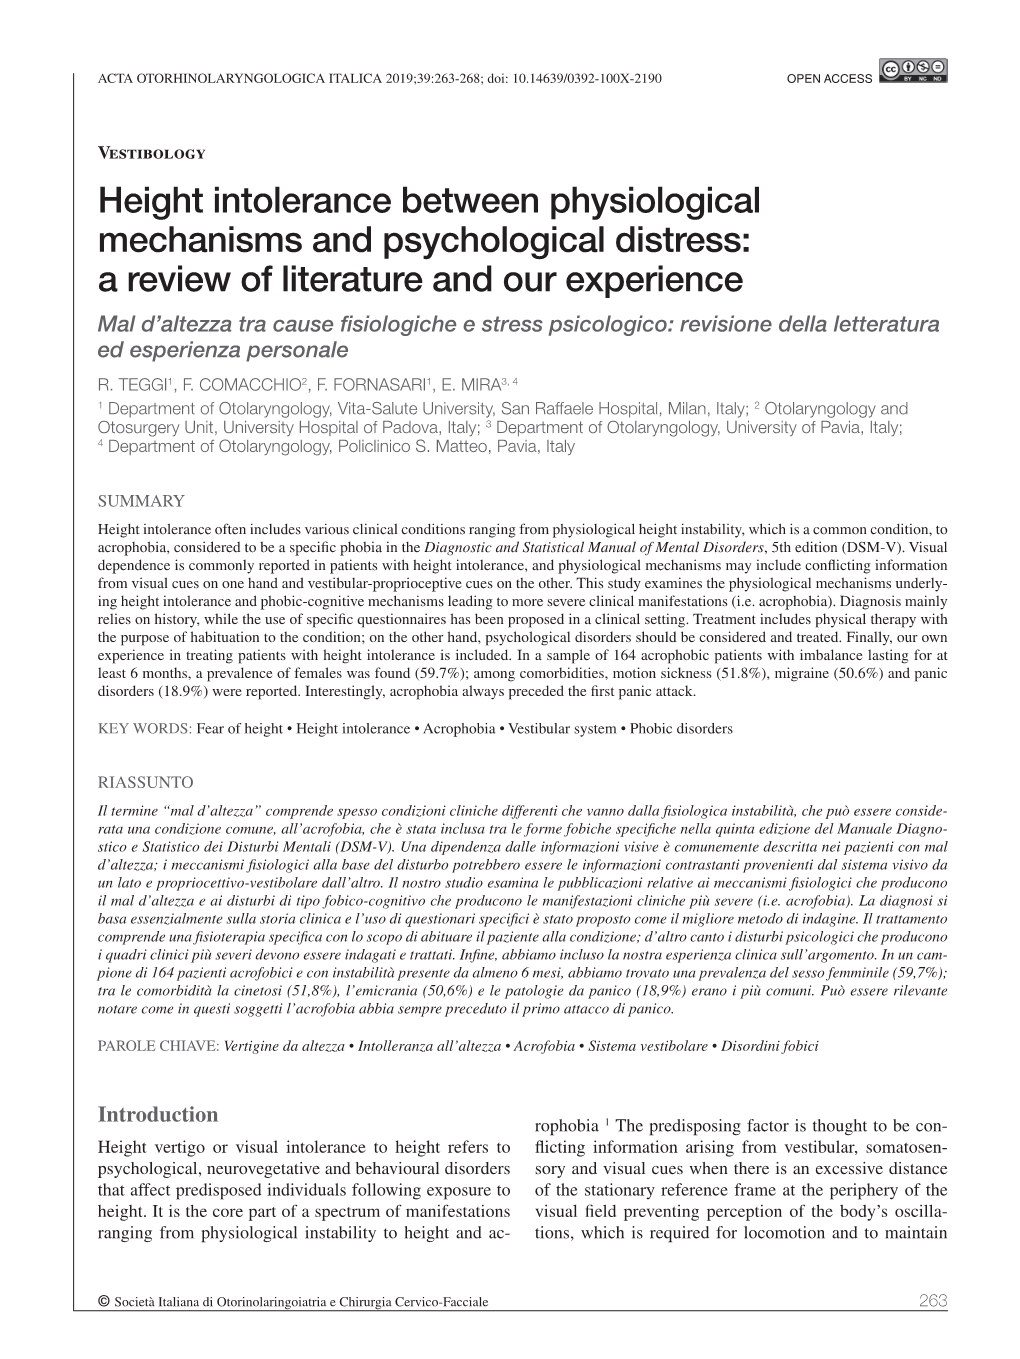 Height Intolerance Between Physiological Mechanisms and Psychological Distress